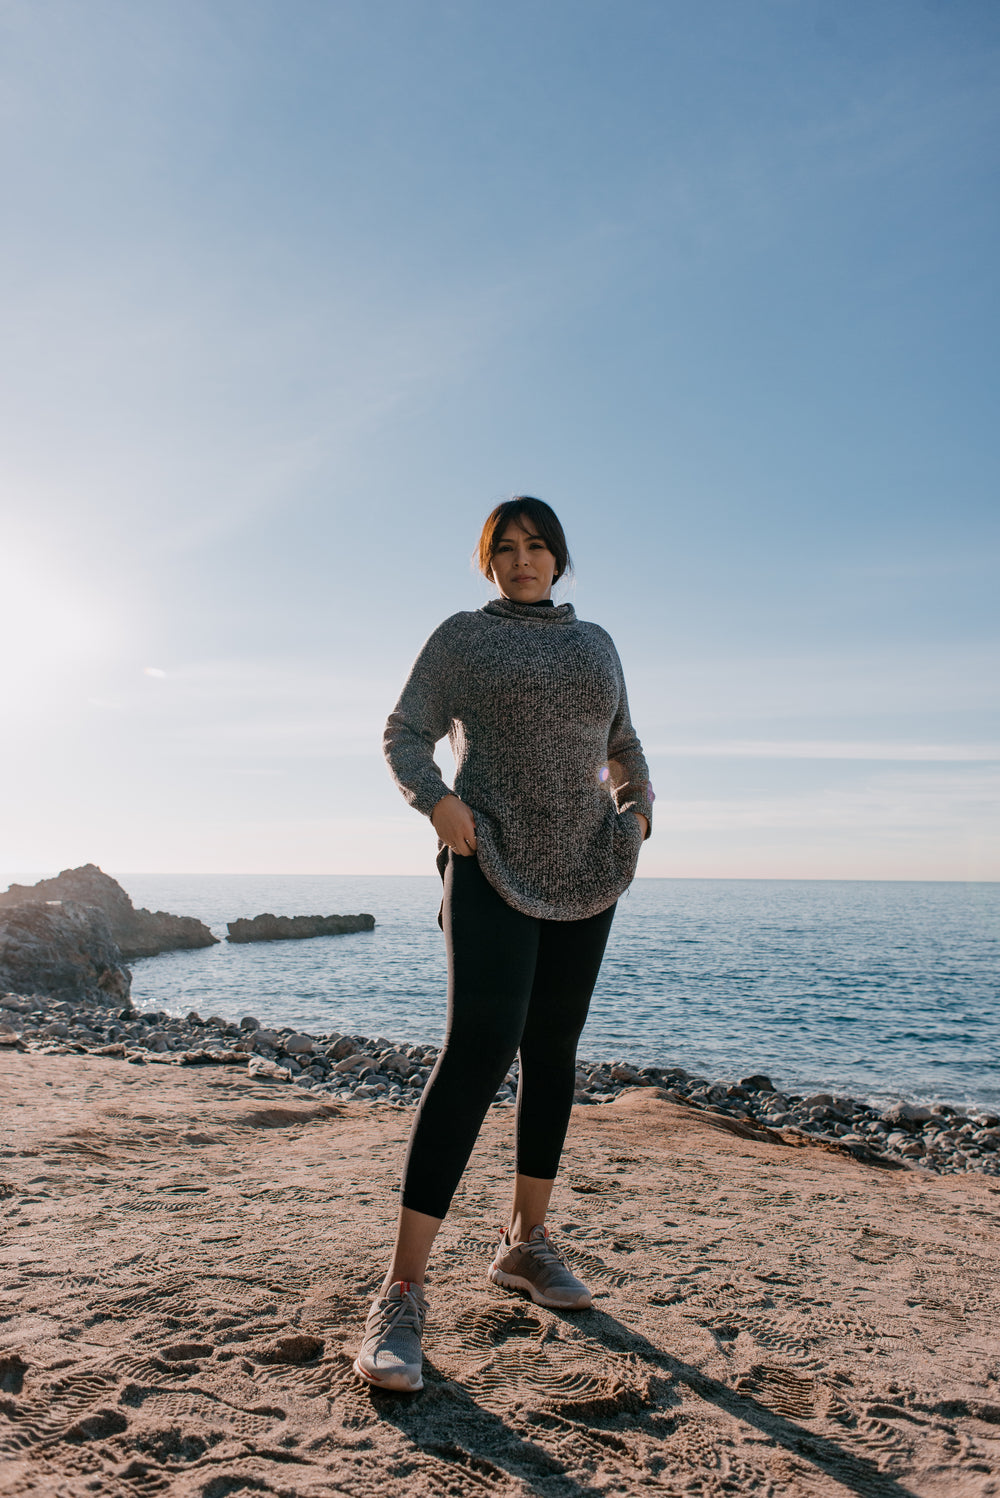 woman in sports clothes stands on a beach in the morning light